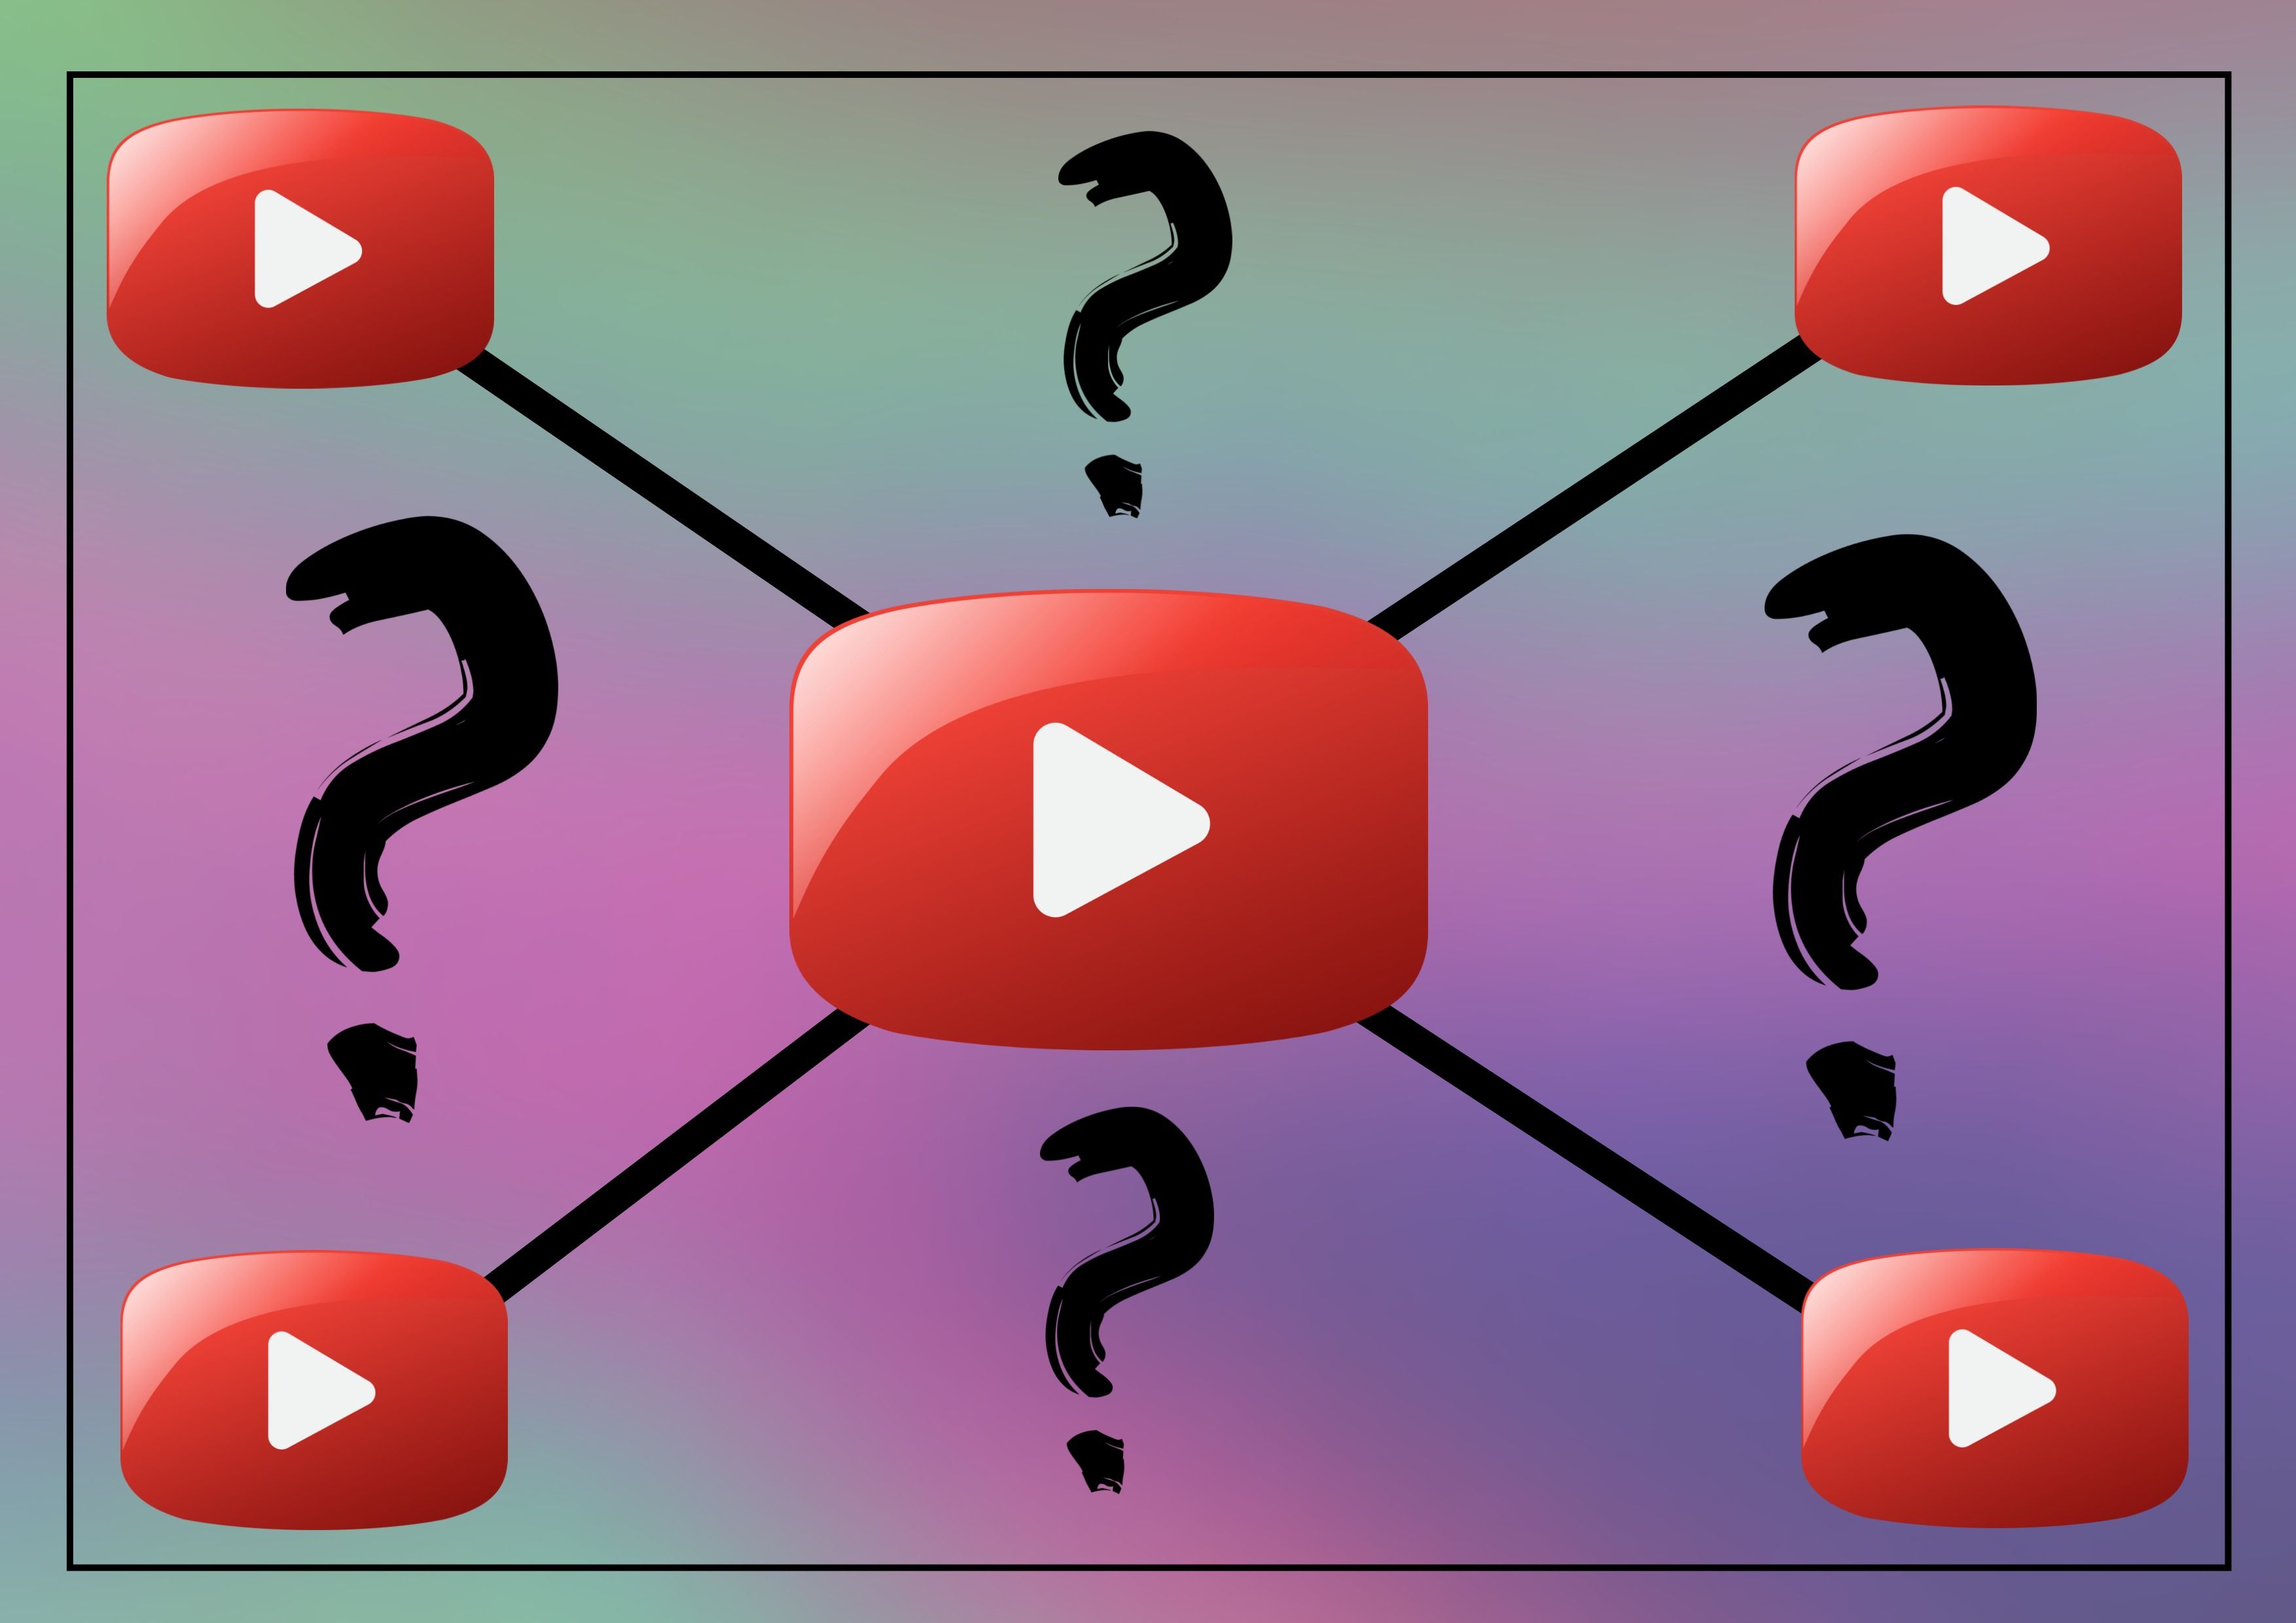 Colorful 'What is a YouTube Playlist' Image with 5 red video play button and 4 question mark icons - A guide to creating well-structured YouTube playlists: A step-by-step beginners guide - Image